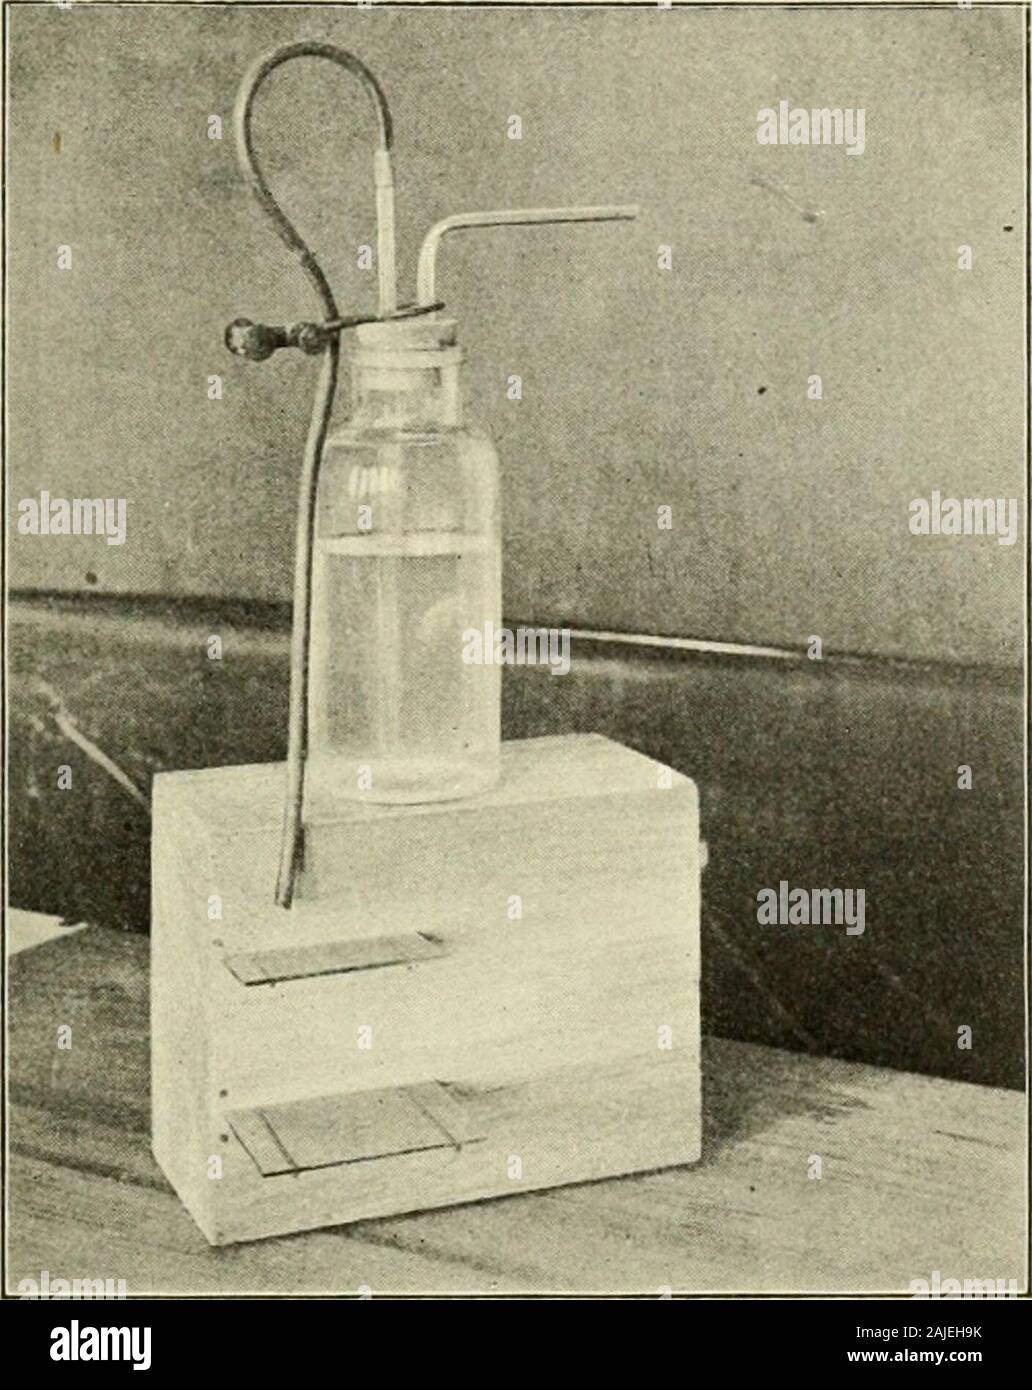 Field, laboratory, and library manual in physical geography . rble soluble in water? Put some ofthe powdered marble in a small beaker and fill the beaker withwater. Lead a tube from a carbon dioxide generator into thisbeaker of water and let the gas slowly bubble up through Fig. 26. A Beaker ar-ranged, for the Forma-tion of Crystals of Alum VEINS 137 the water. Continue this process for a day or two. Againpour off the water, filter, and evaporate to dryness. Doyou find any residuein the evaporatingdish? Is marble solu-ble in water which hascarbon dioxide in it?Water with carbondioxide is respo Stock Photo